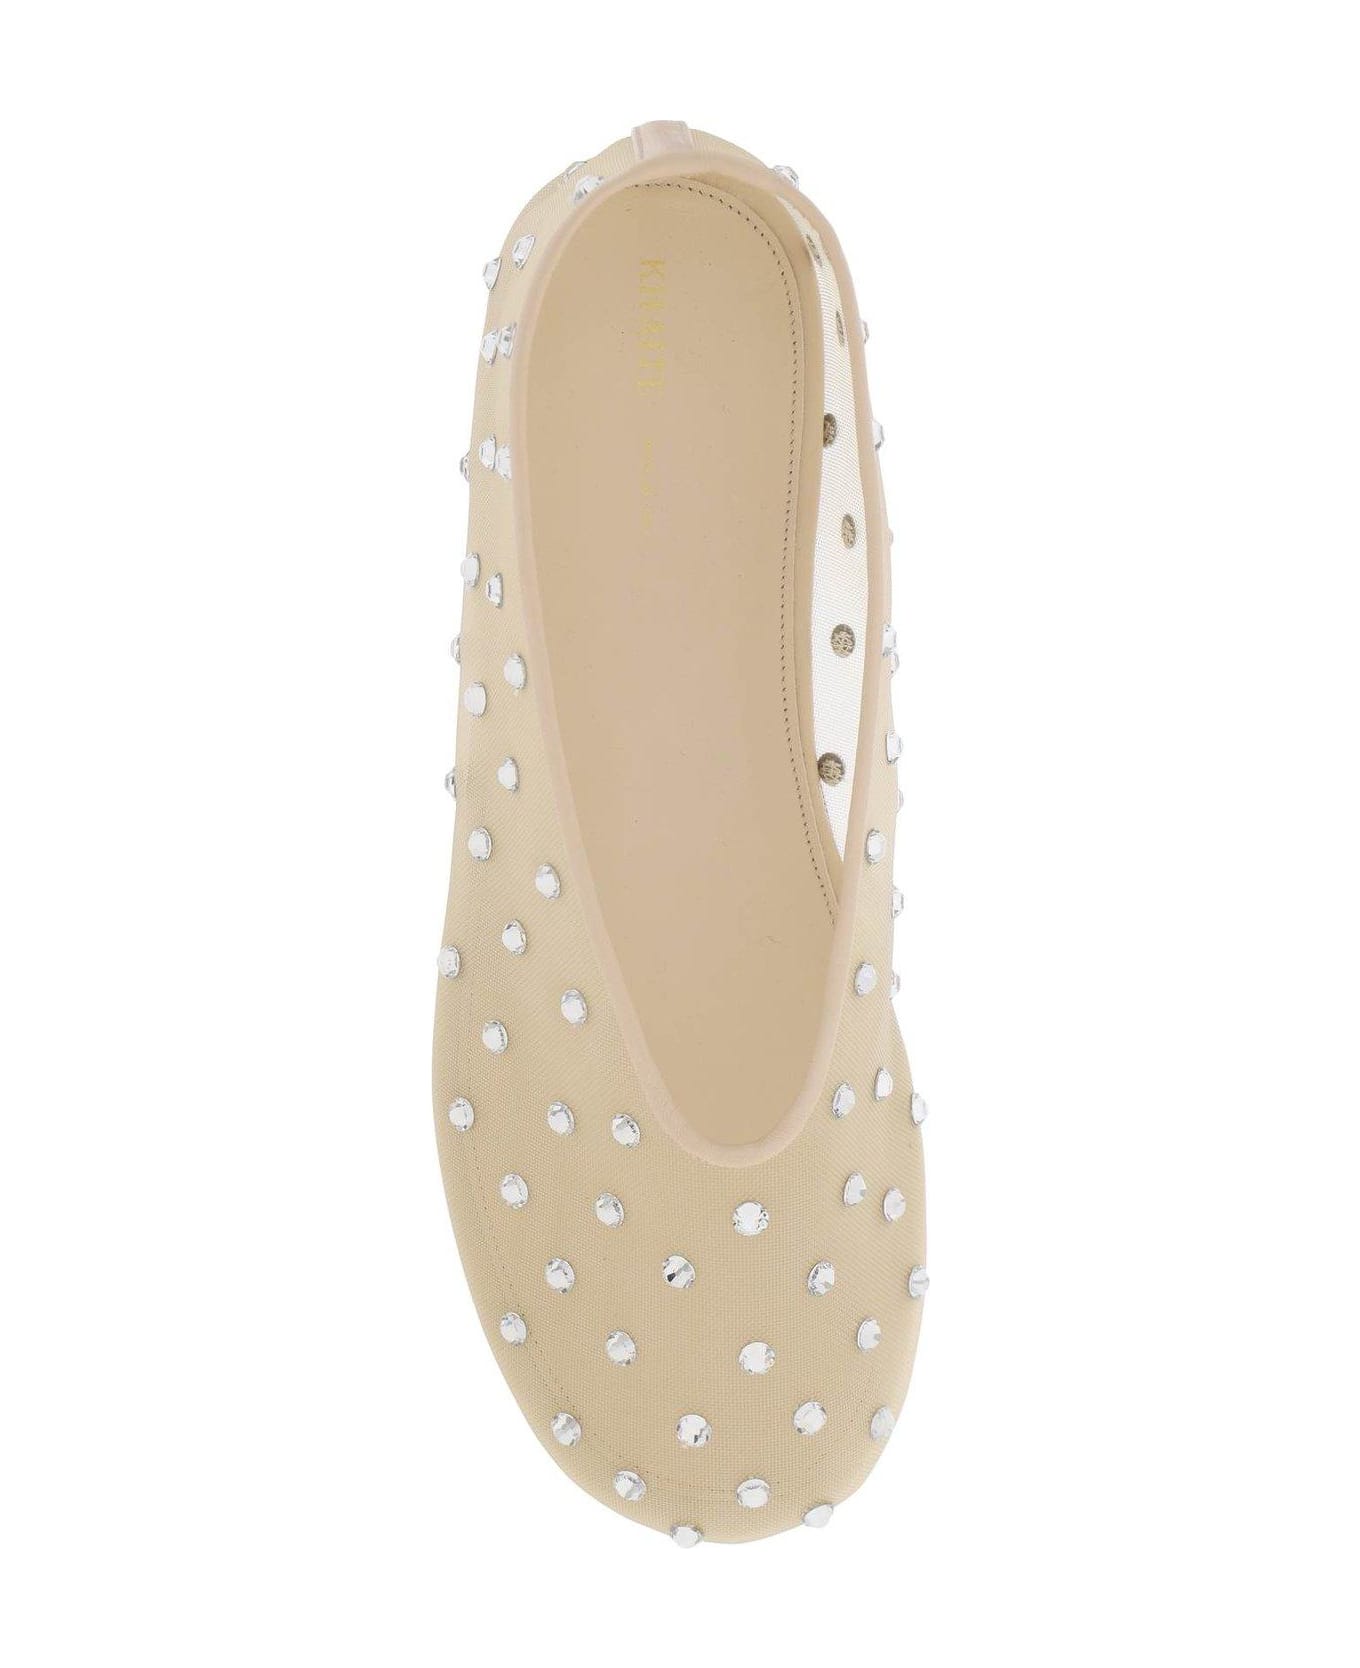 Khaite The Marcy Embellished Mesh Ballet Shoes - Nude